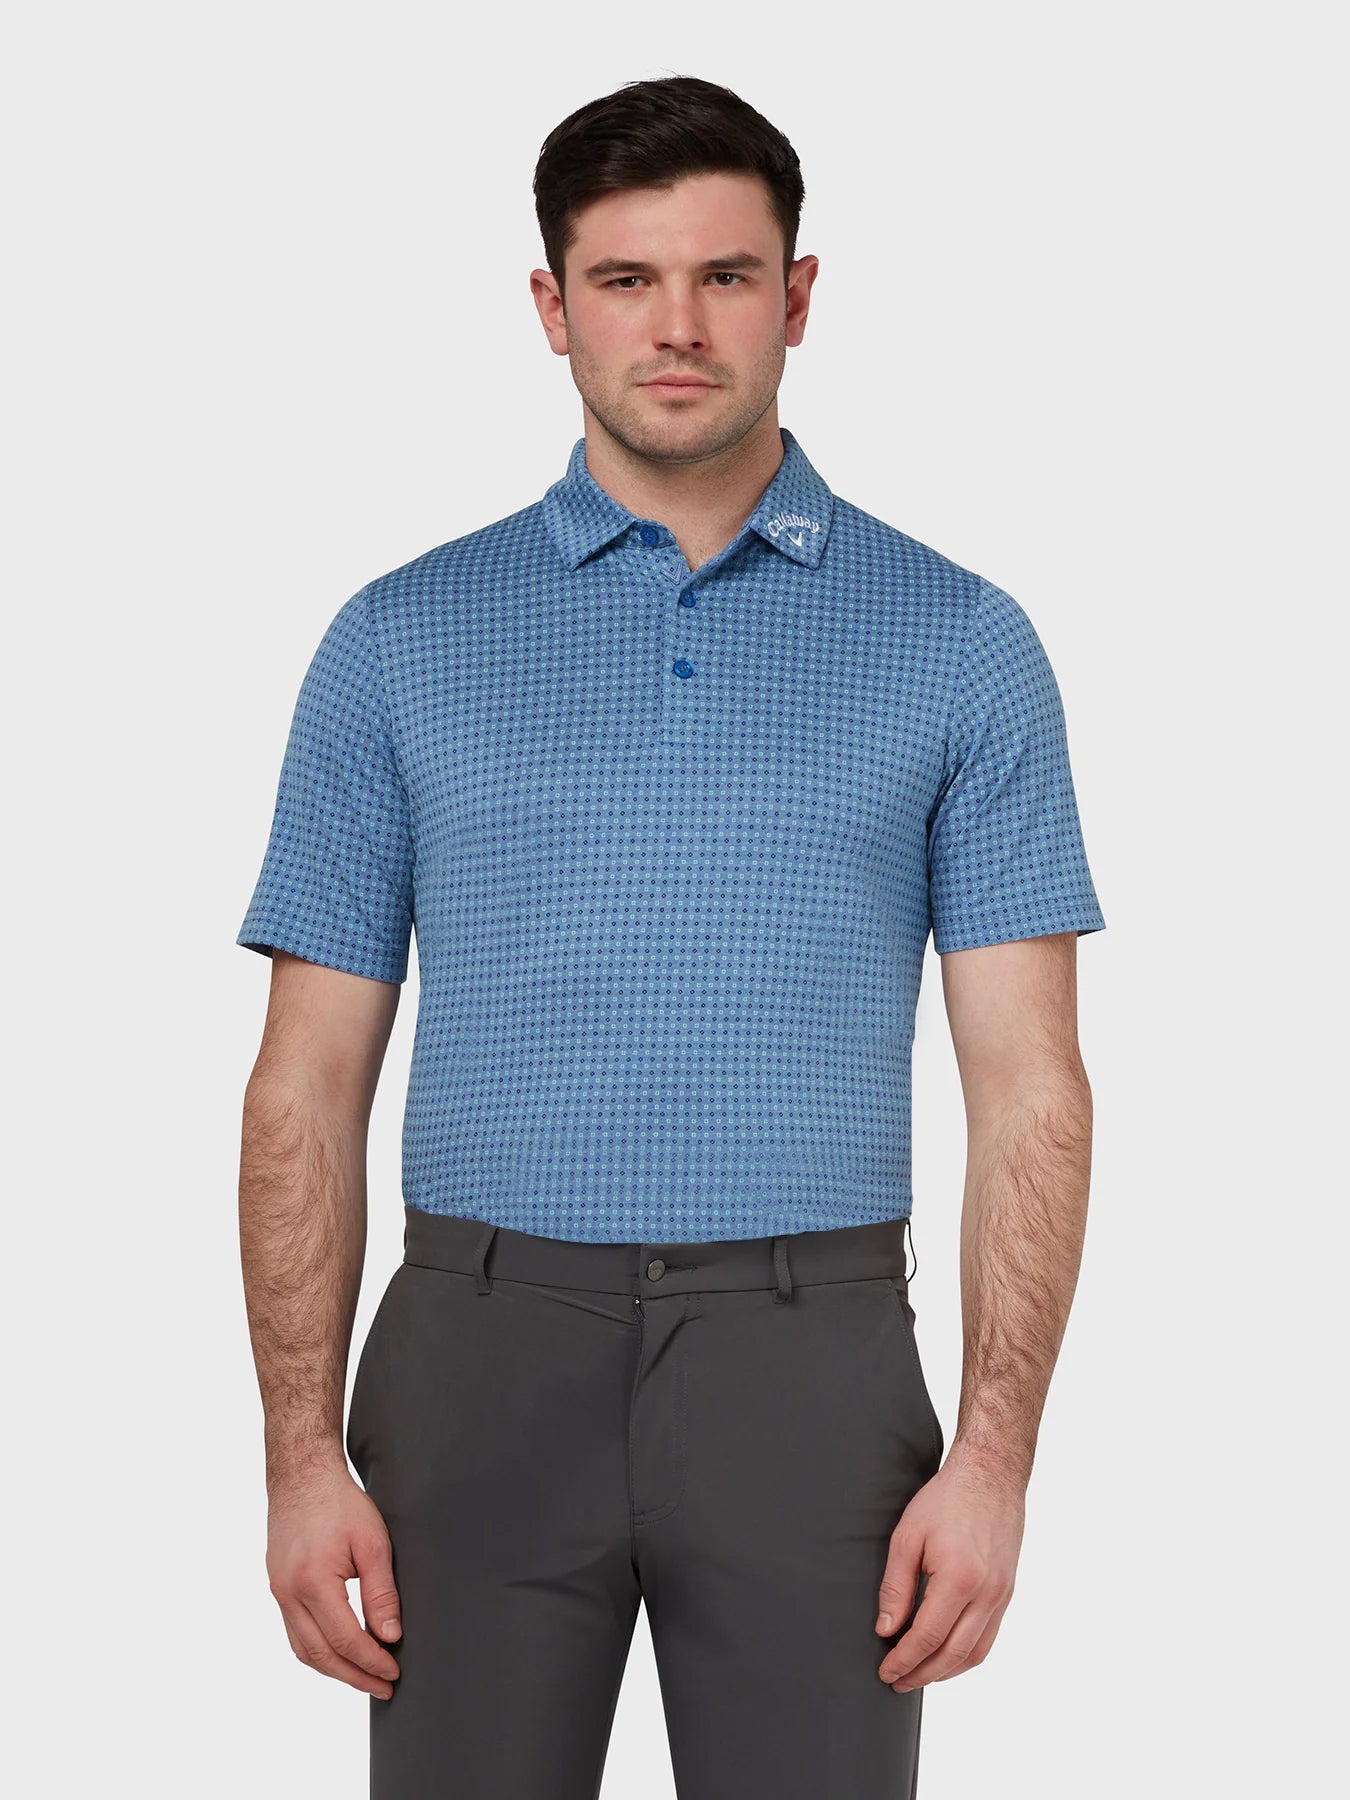 View Soft Touch Micro Print Polo In Magnetic Blue Heather Magnetic Blue Heather L information